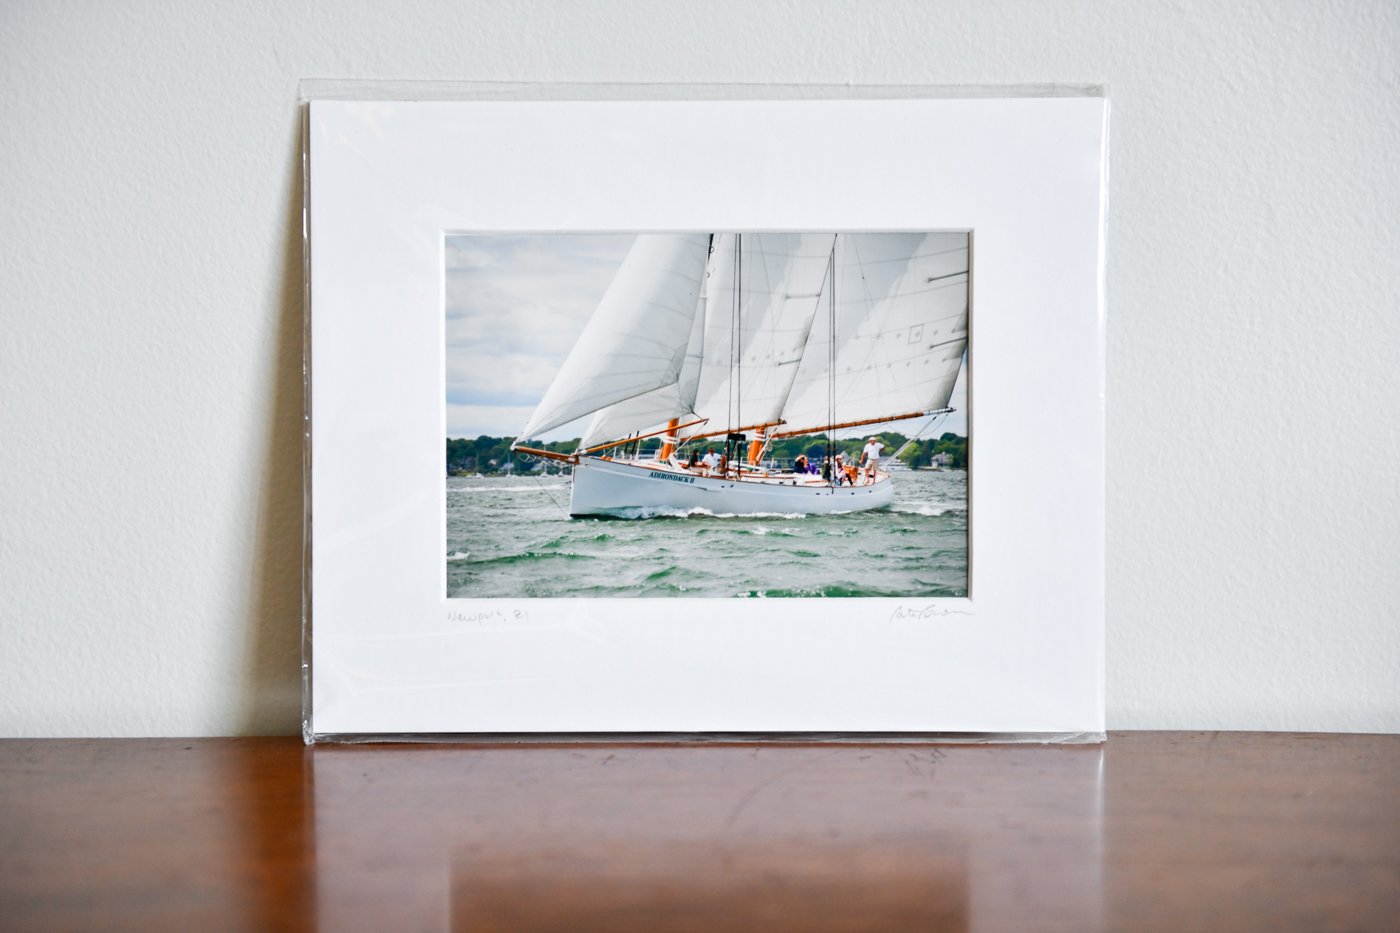 Cate Brown Photo Adirondack II on a Green Sea // Matted Mini Print 8x10" Available Inventory Ocean Fine Art